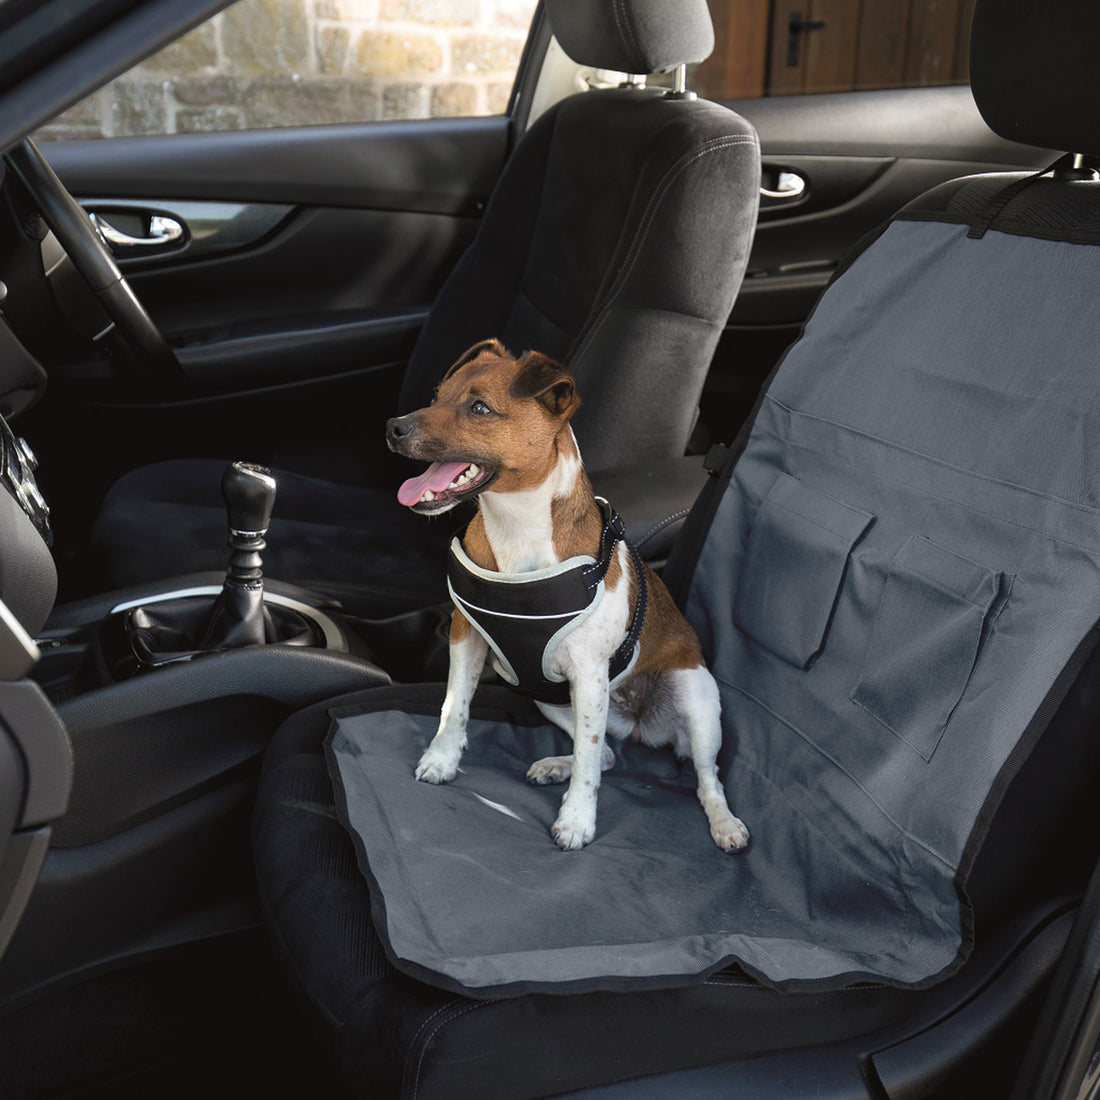 Henry-Wag-Single-Car-Seat-Protector